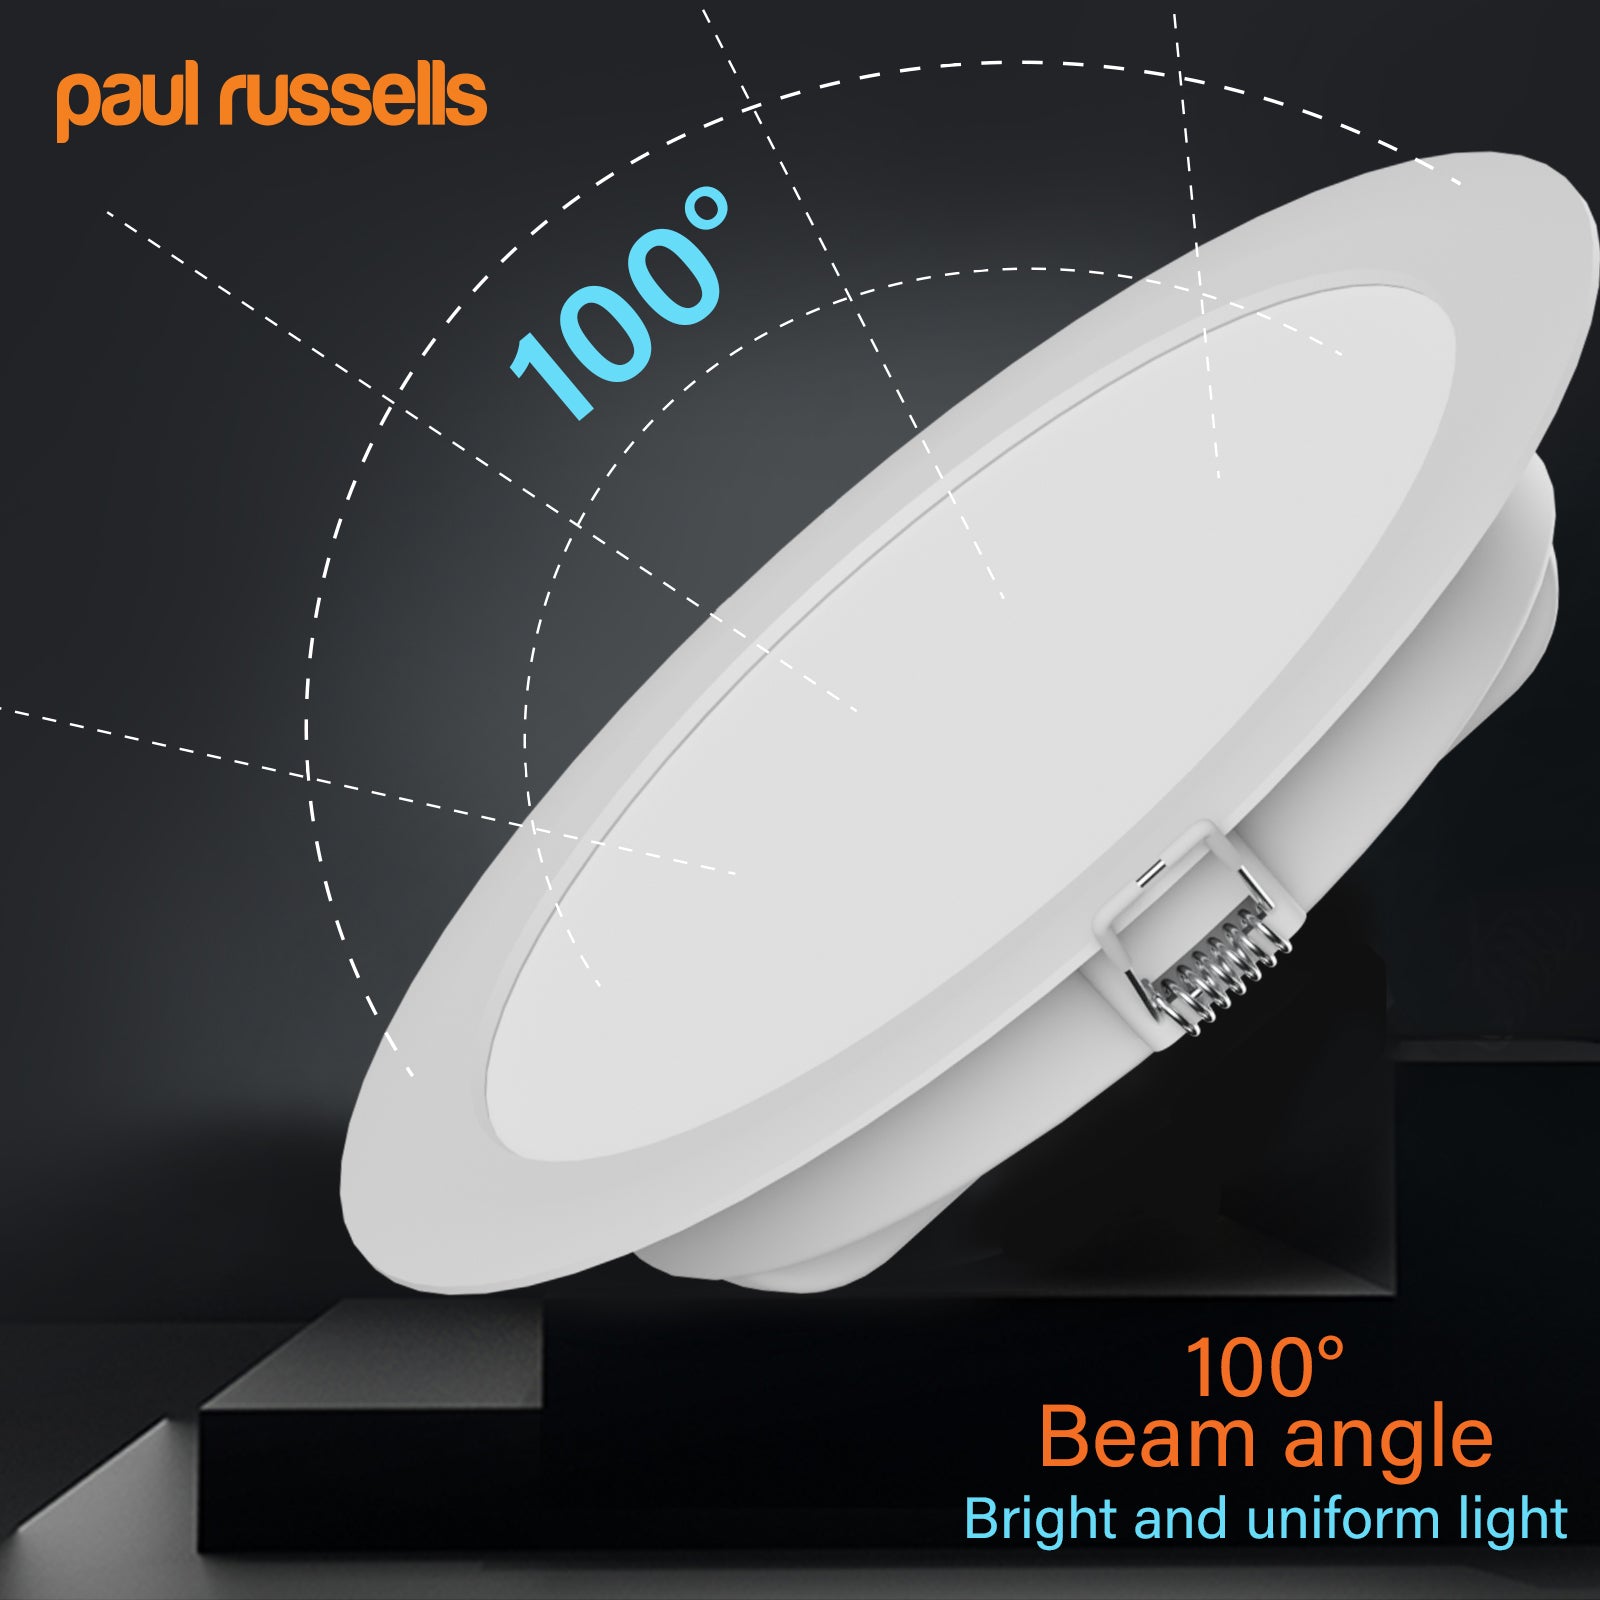 20W, LED Round Ceiling Downlights, 2150 Lumens, 4000K Cool White, Non-Dimmable Panel Spotlights